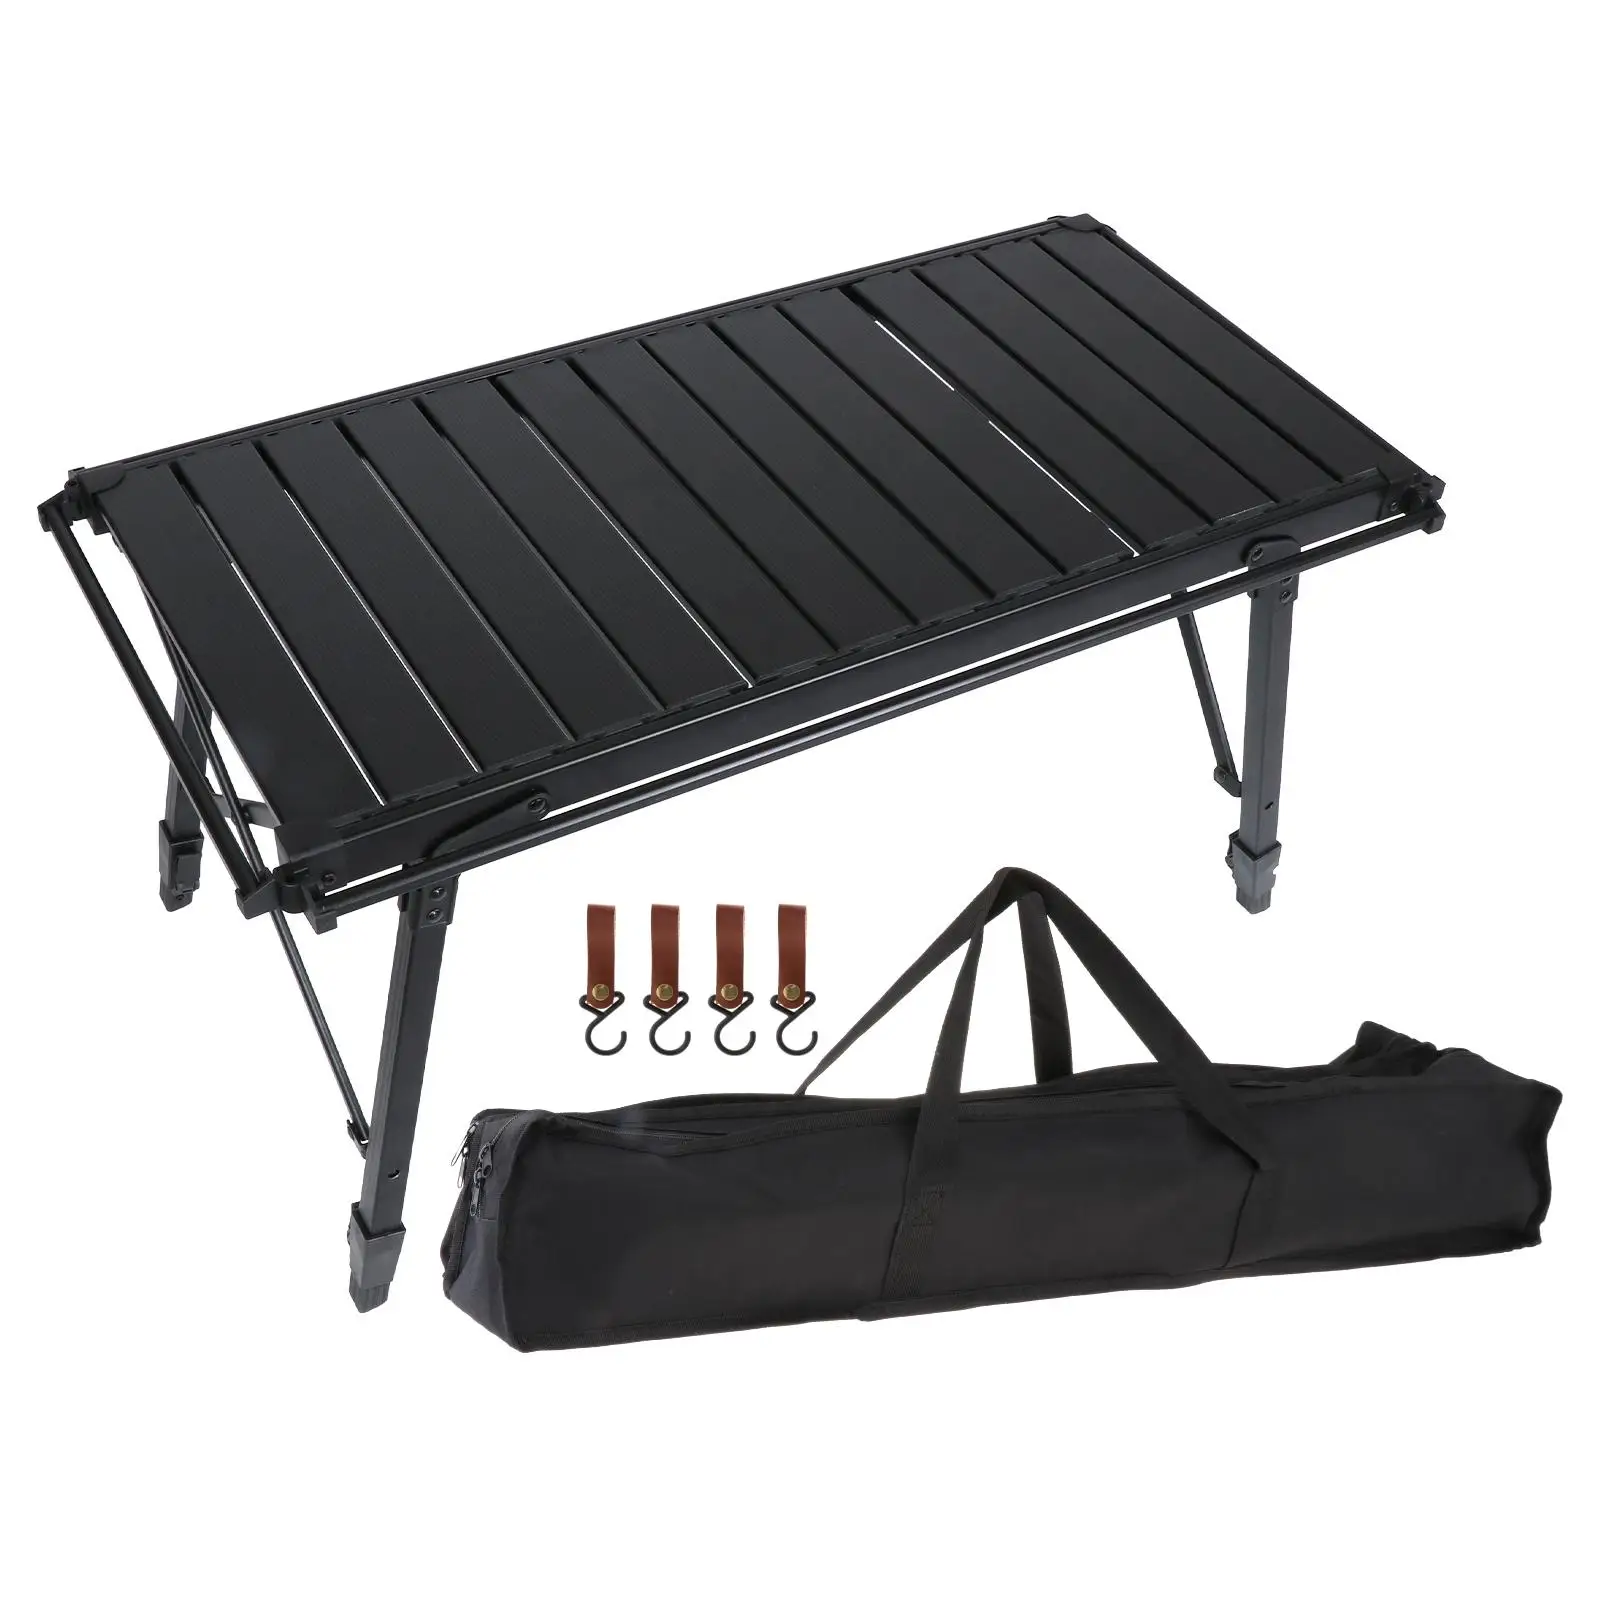 Camping Folding Table Compact Aluminum Alloy with Storage Bag Easy to Carry Outdoor Table for Fishing Beach BBQ Garden Kitchen